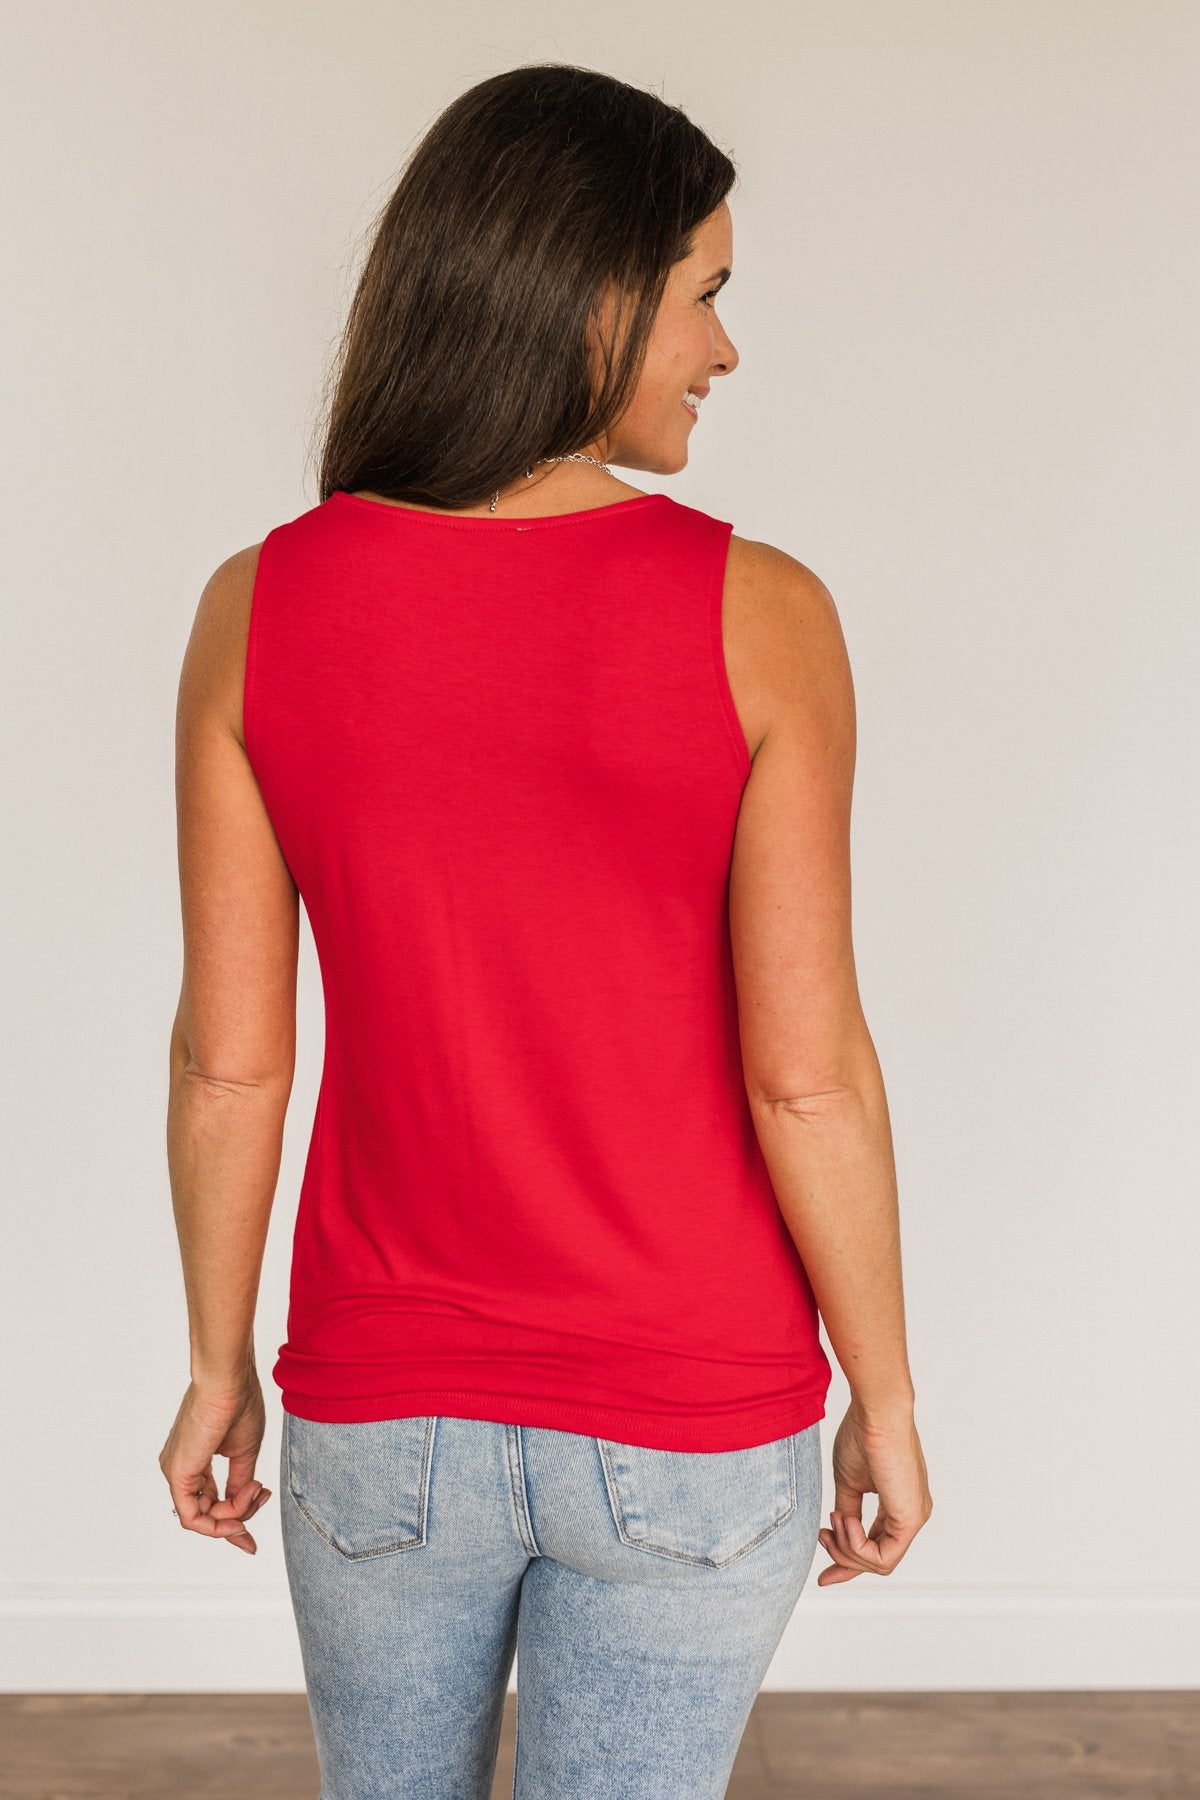 Places to Go Criss Cross Tank Top- Red – The Pulse Boutique